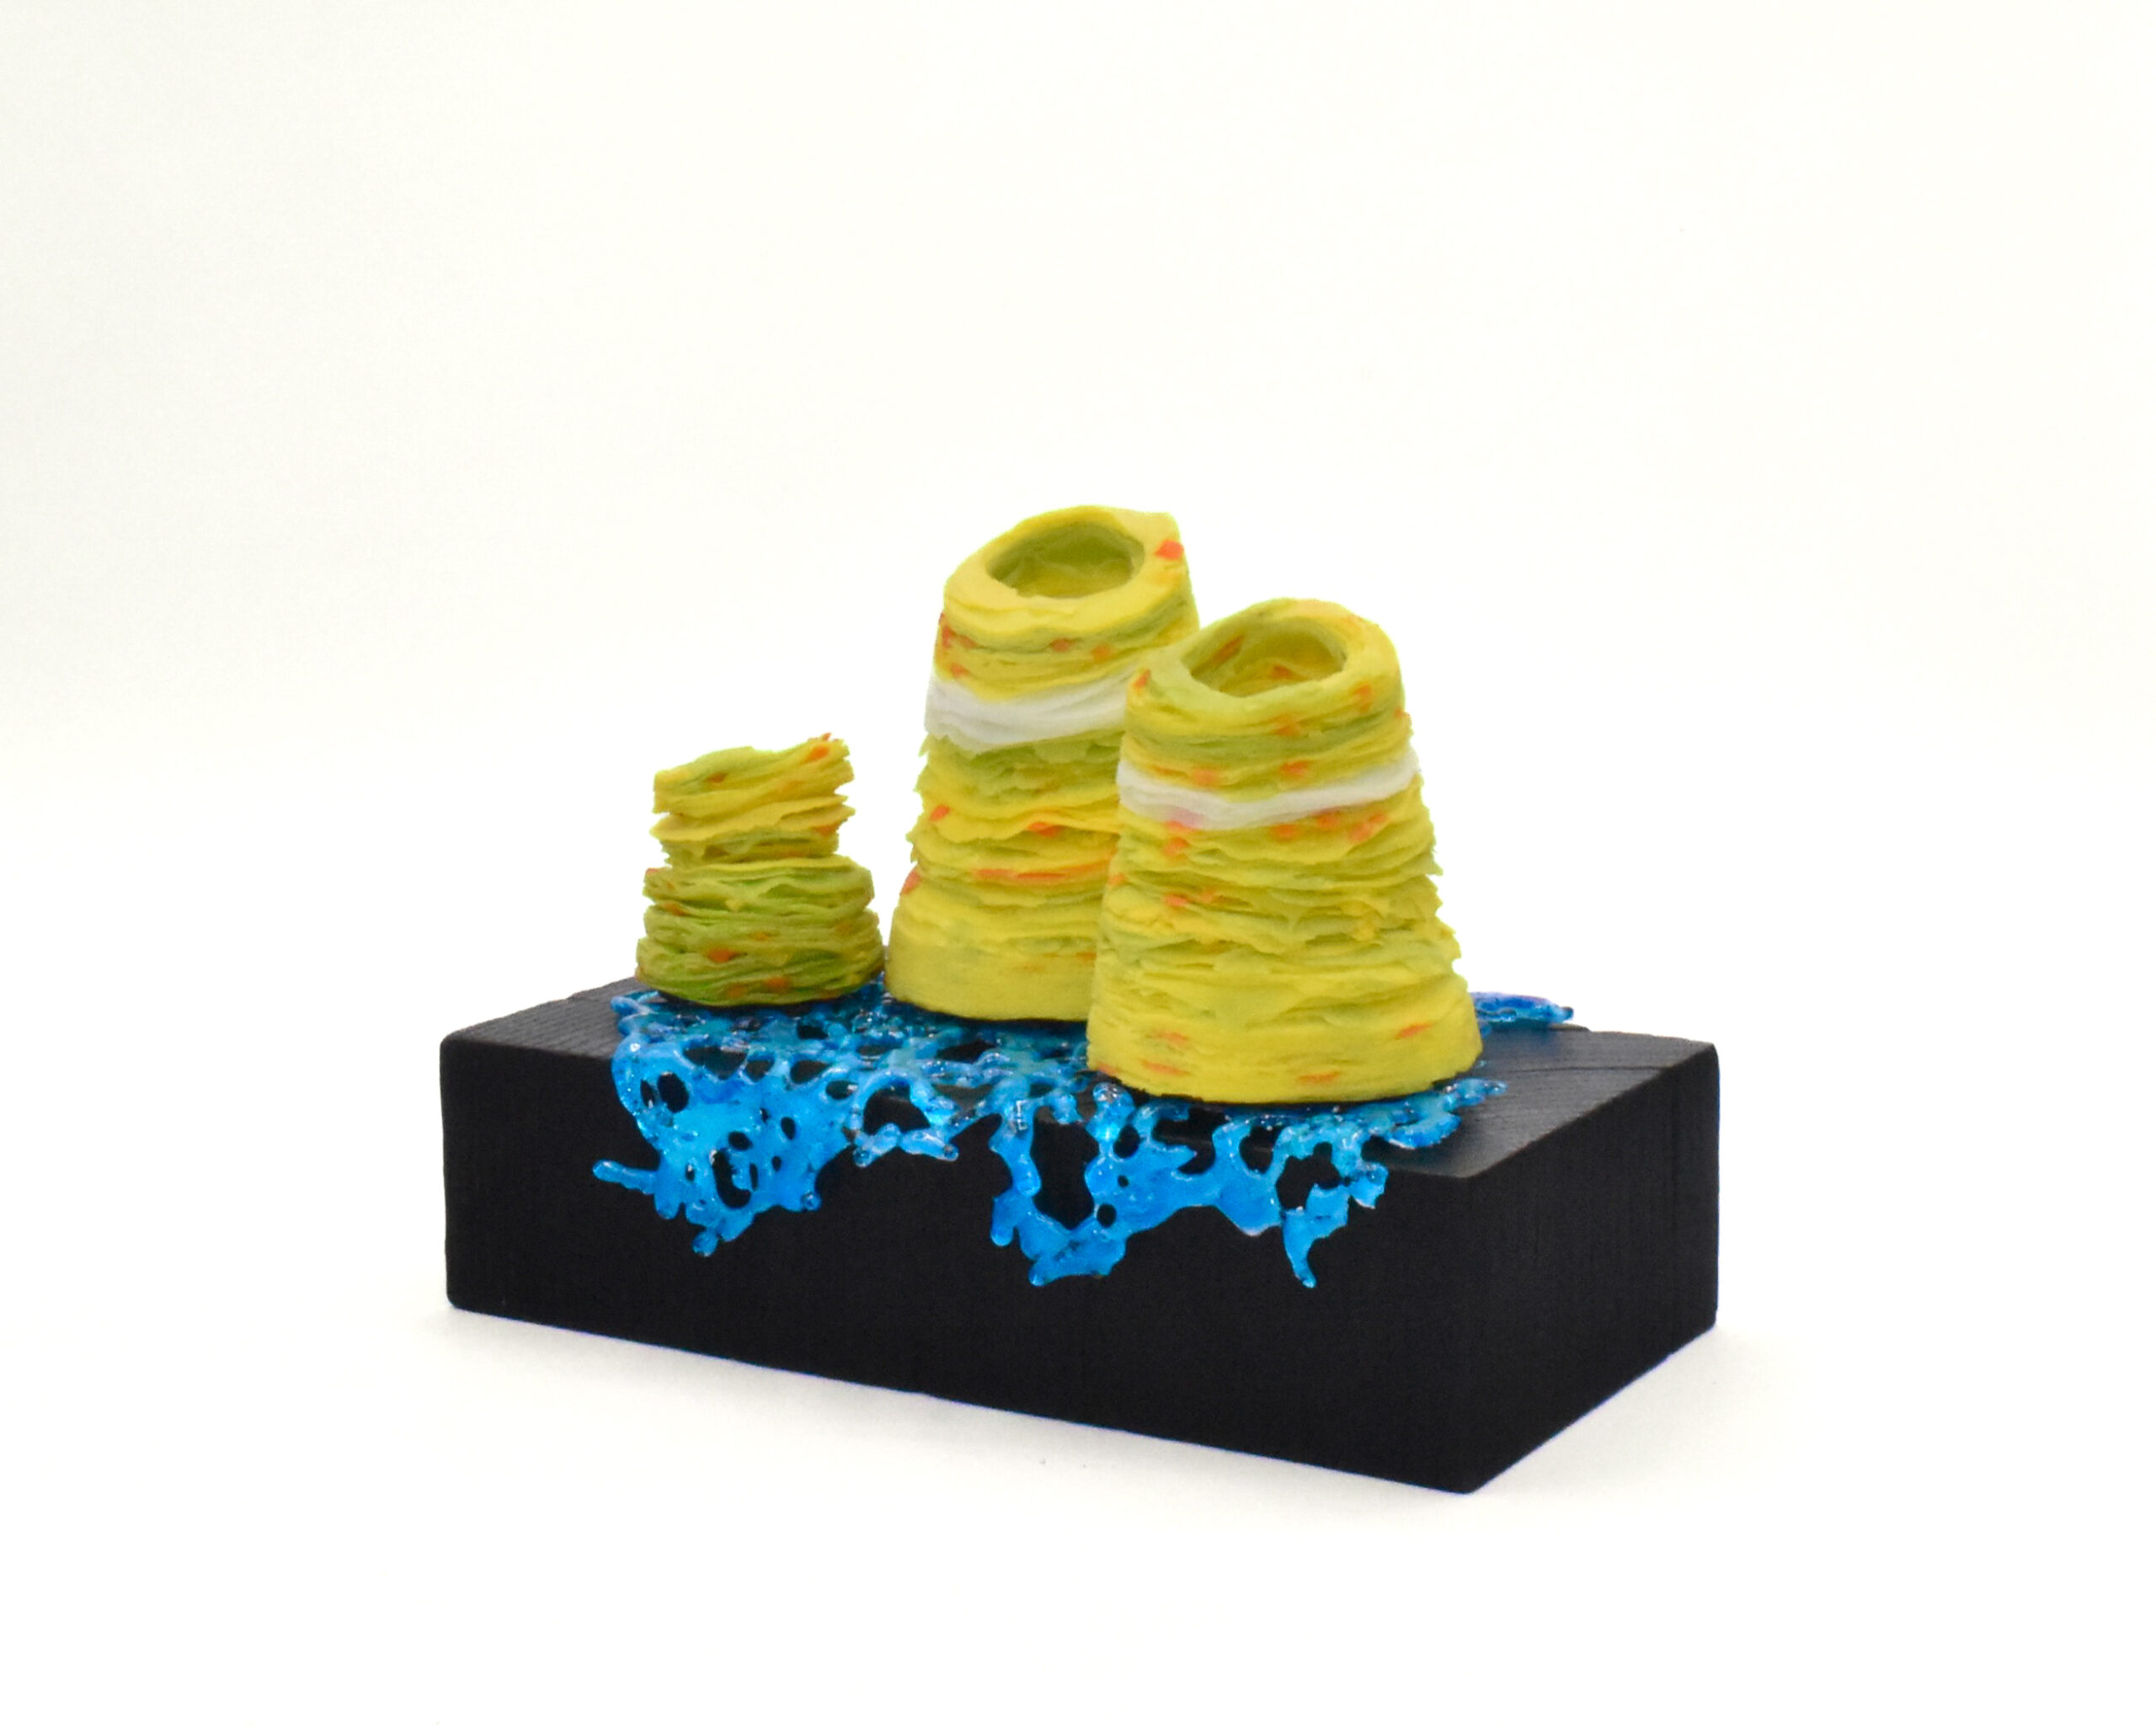 Alison Jardine 'Yellow stacks 1' 21(h)x16x8 Glass, silver leaf, paint on wood